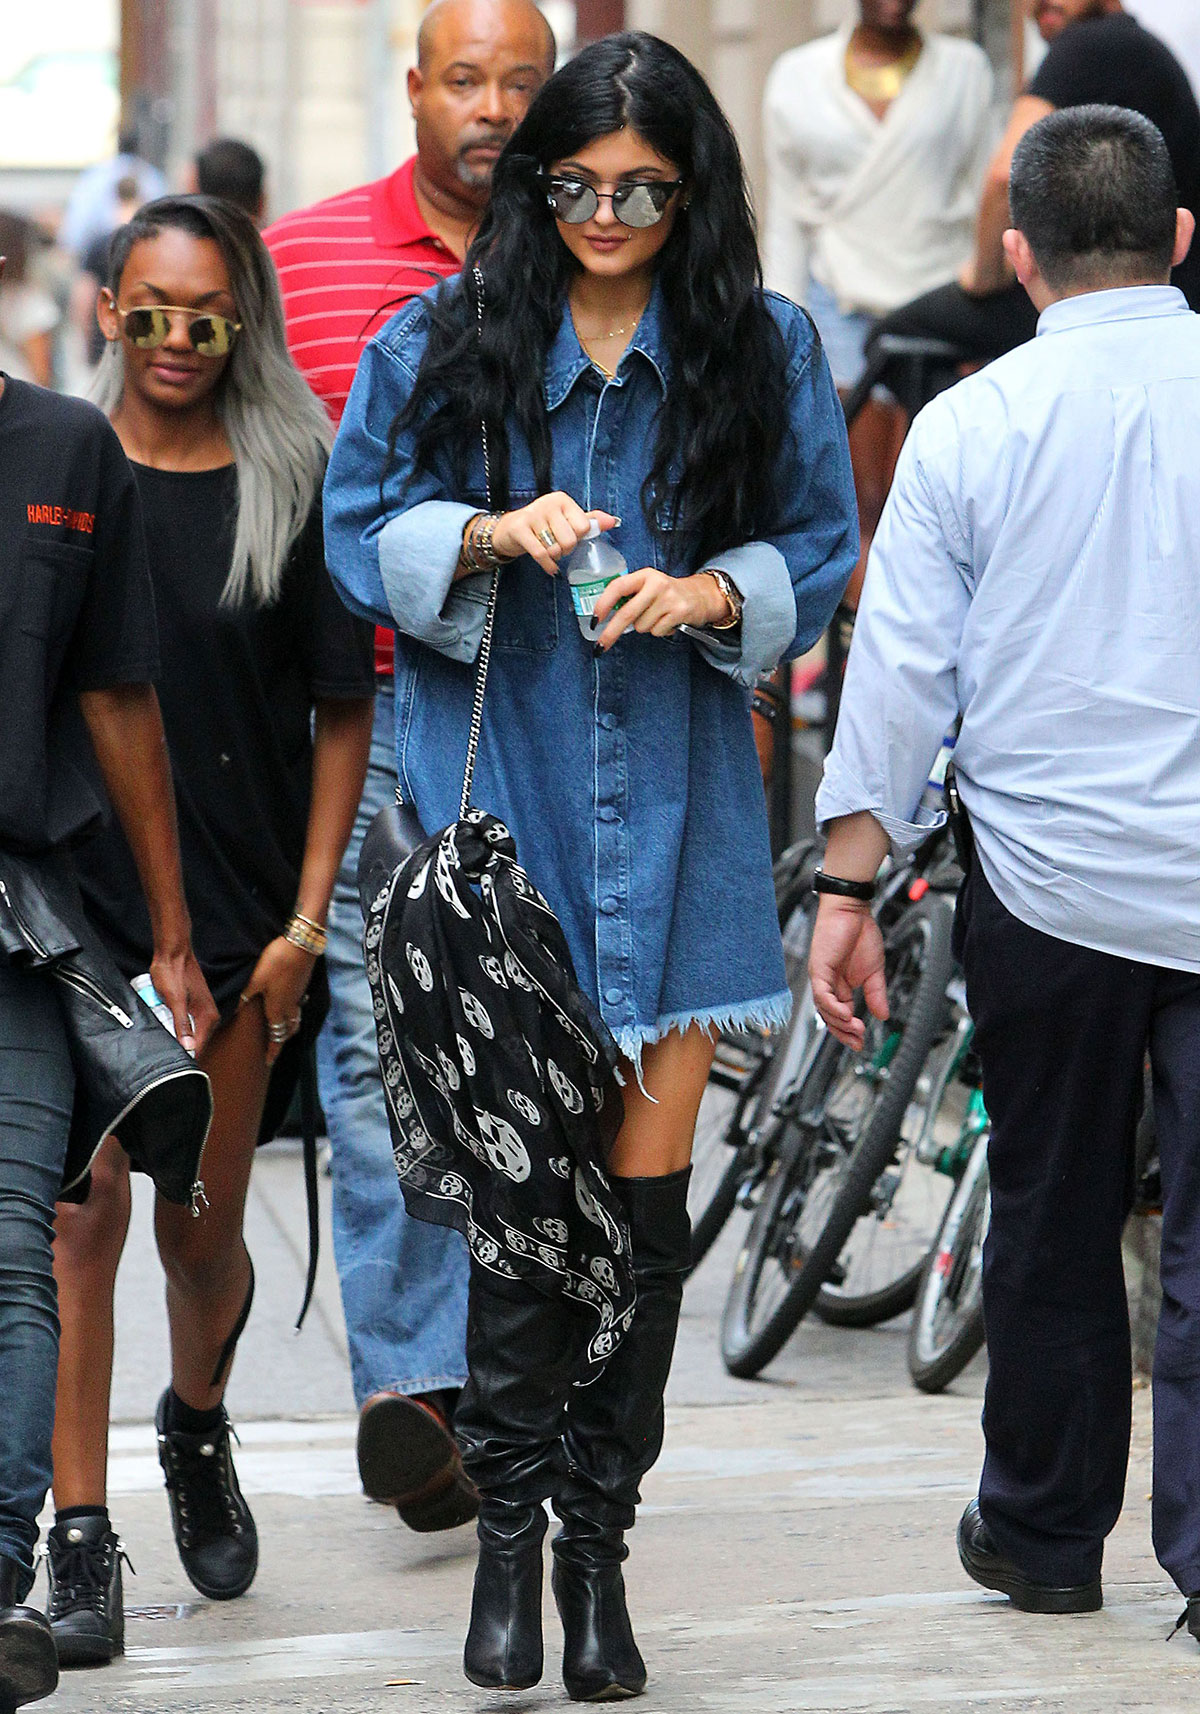 Kylie Jenner out in Soho district of New York City